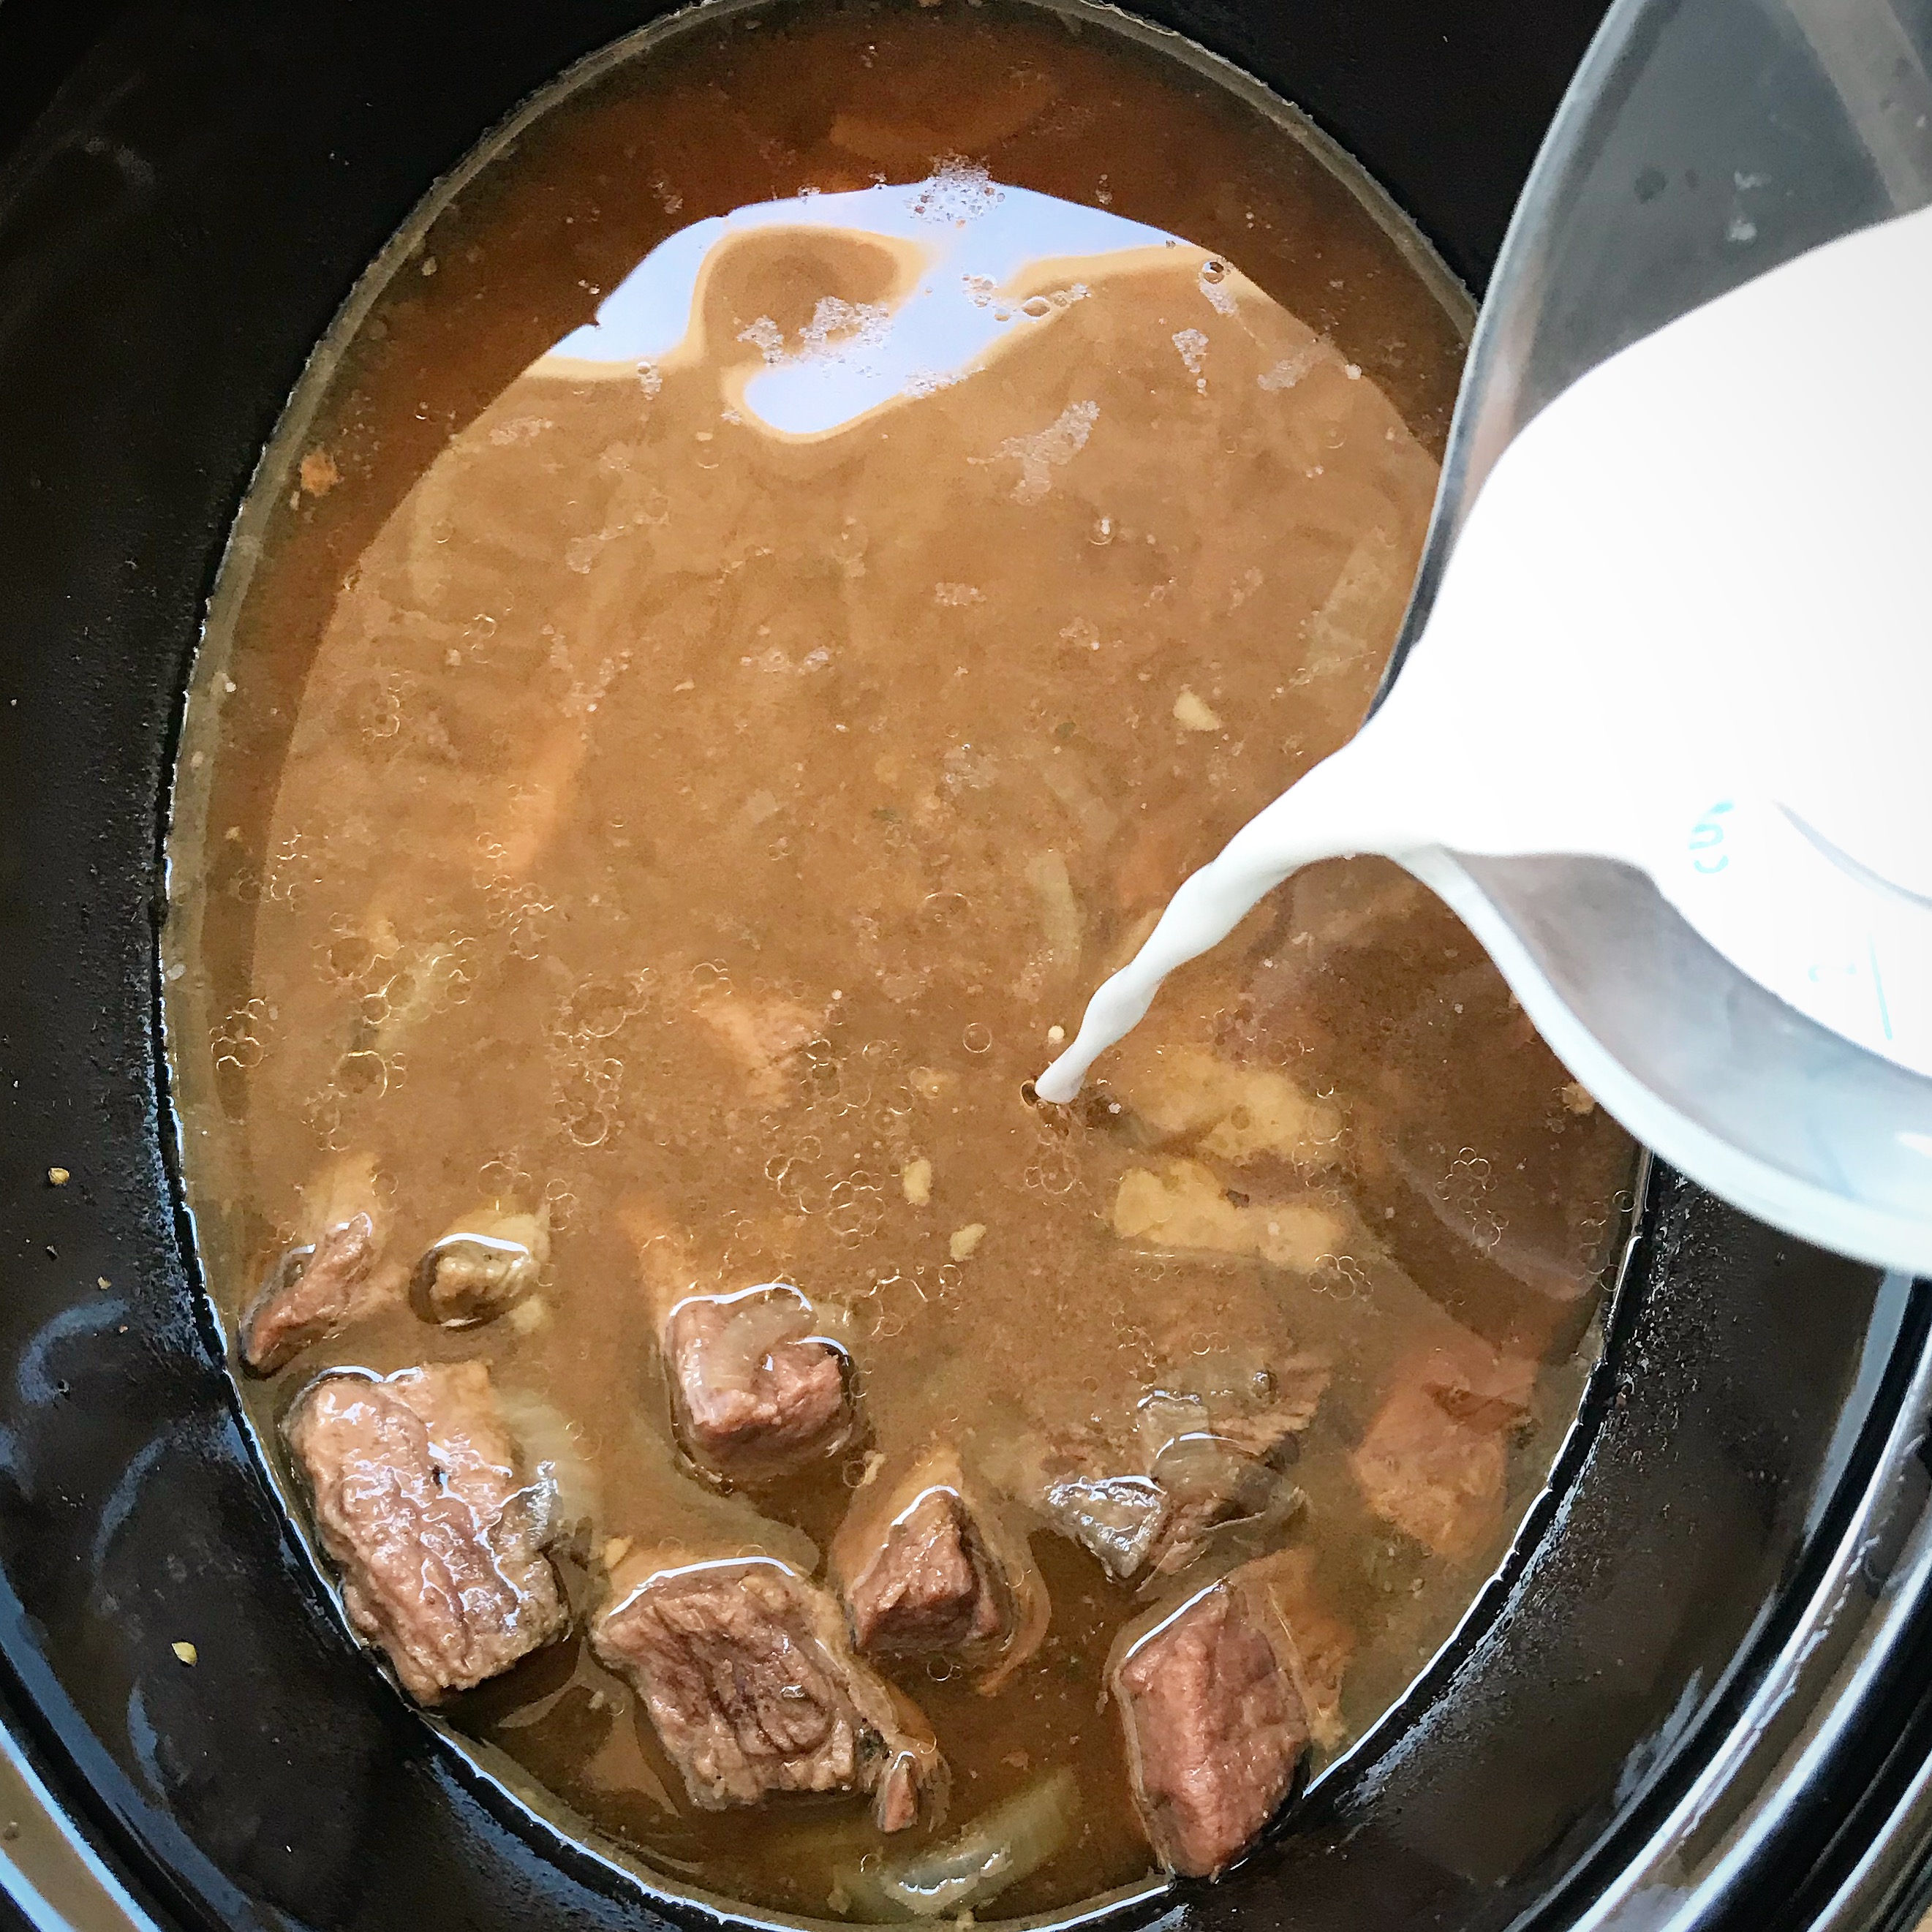 Beef tips cook with a homemade gravy in this slow cooker recipe. Comfort food made healthy! This recipe is both paleo and whole30 compliant.